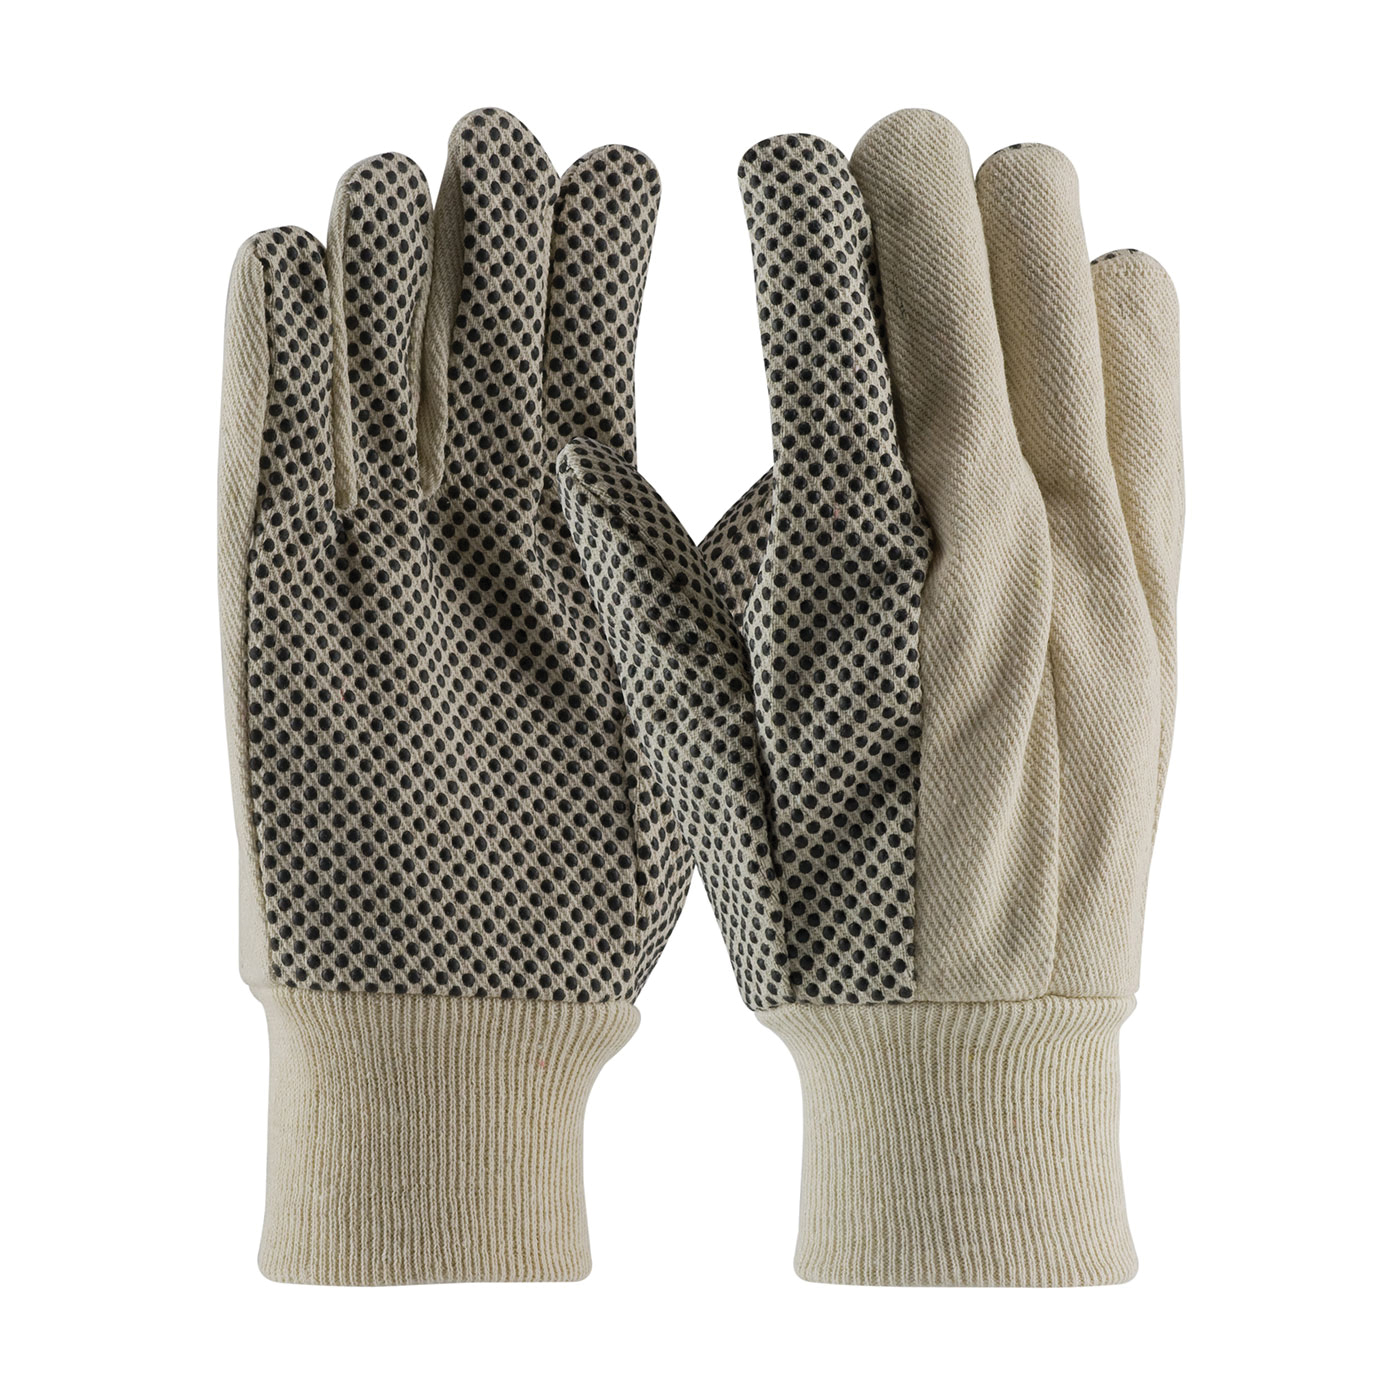 PIP® 91-910PDI Economy Grade General Purpose Gloves, Fabric/Work, Clute Cut/Full Finger/Straight Thumb Style, PVC Palm, 10 oz Cotton, Natural, Knit Wrist Cuff, PVC Coating, Resists: Abrasion and Cut, Canvas Lining